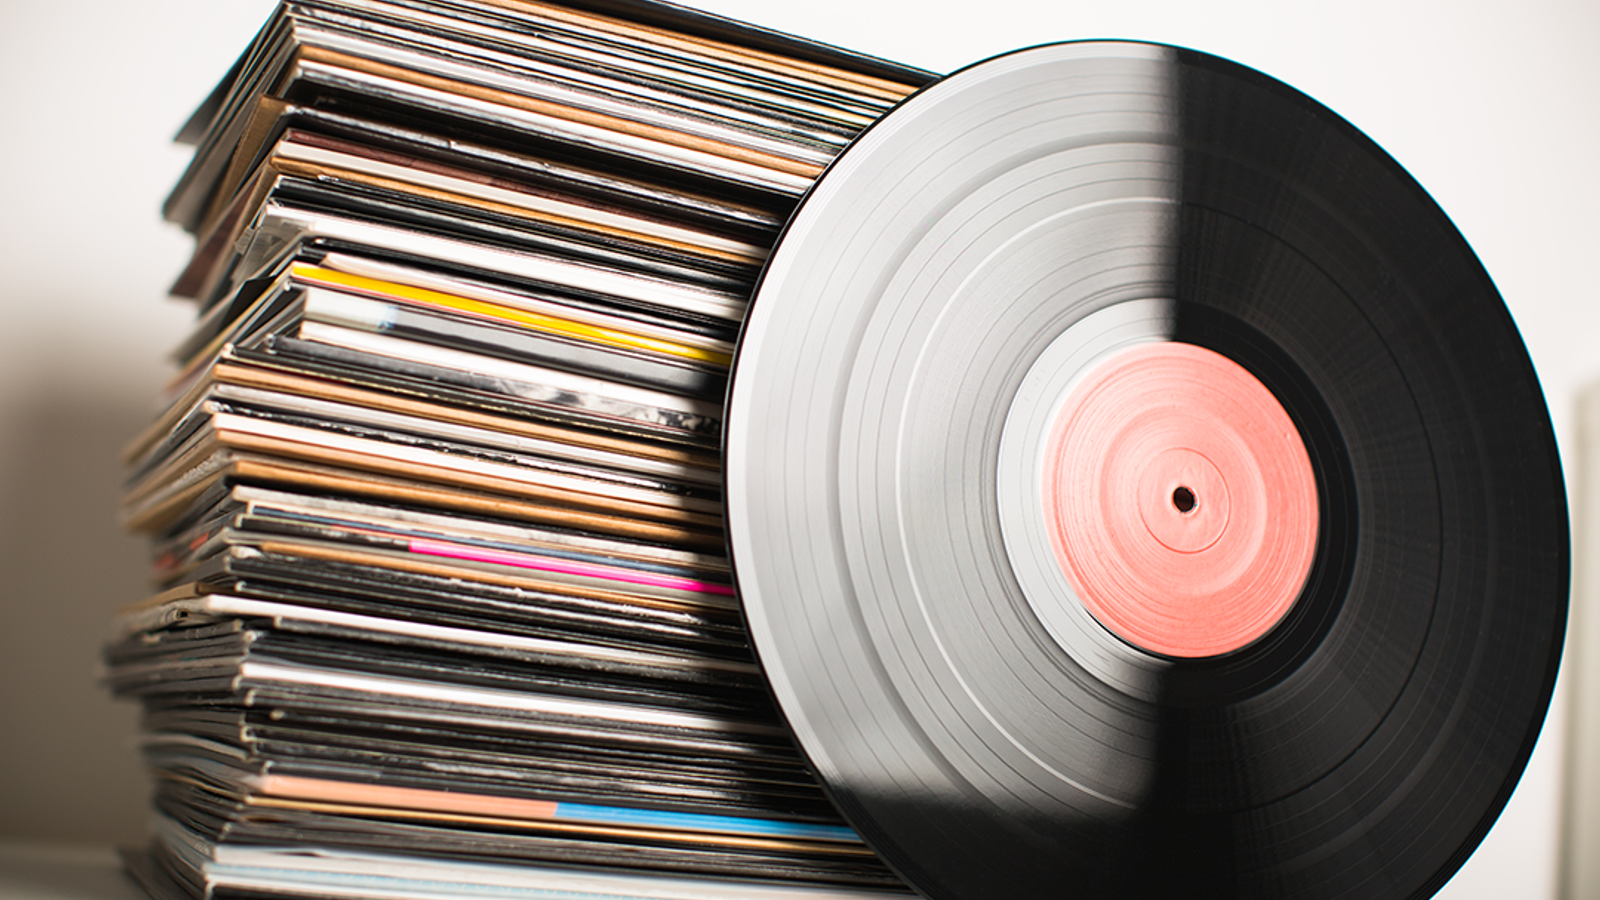 Vinyl record sales in 2021 were the highest in 30 years - with